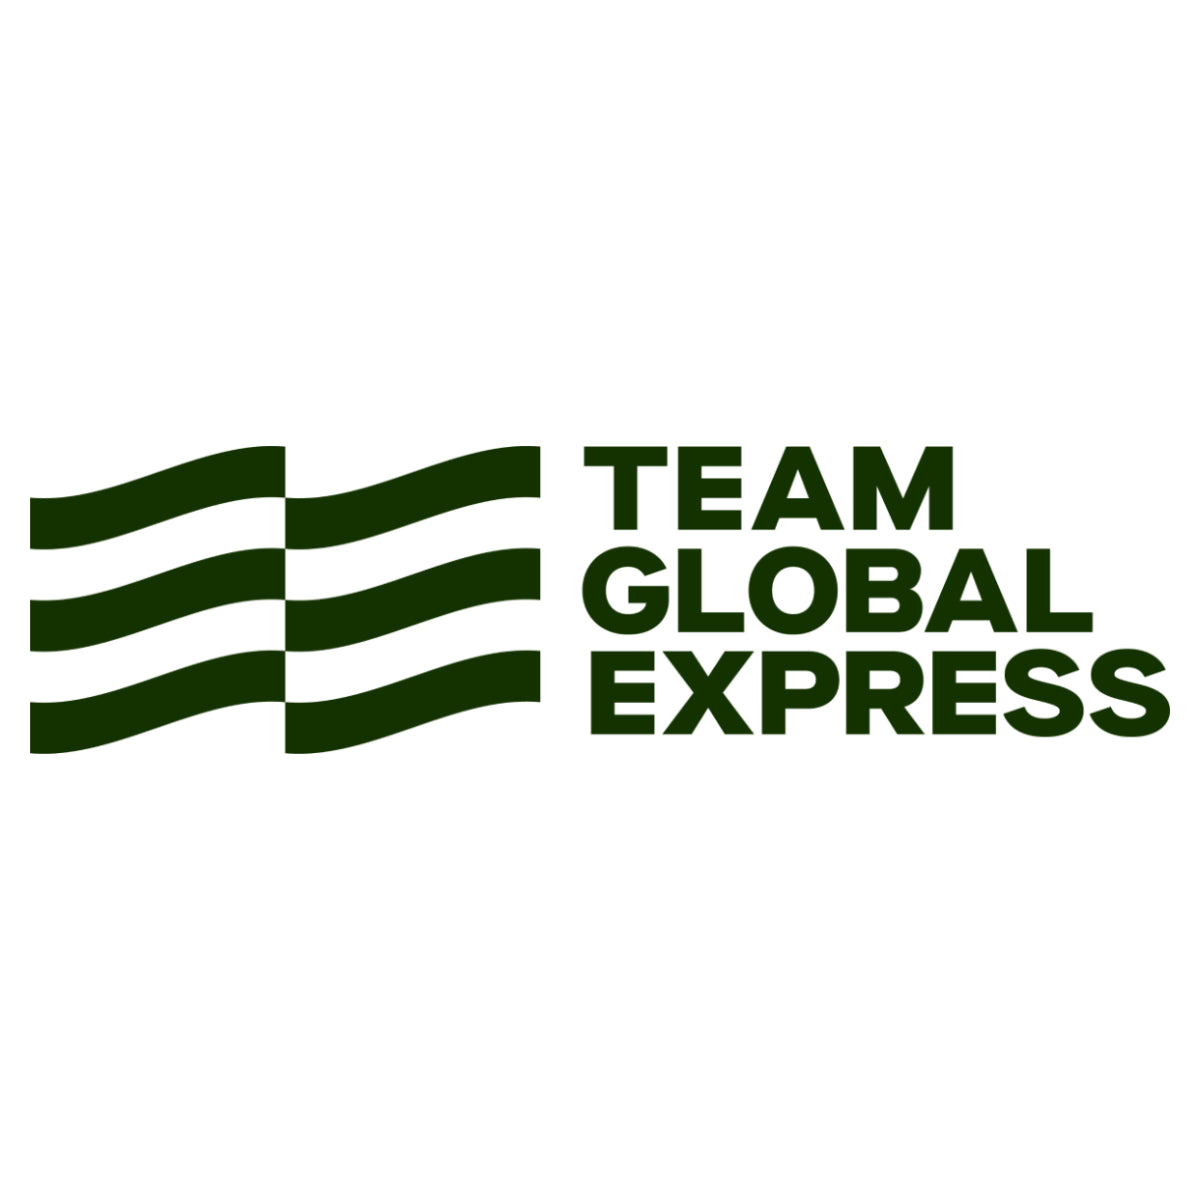 Team Global Express for Shopify